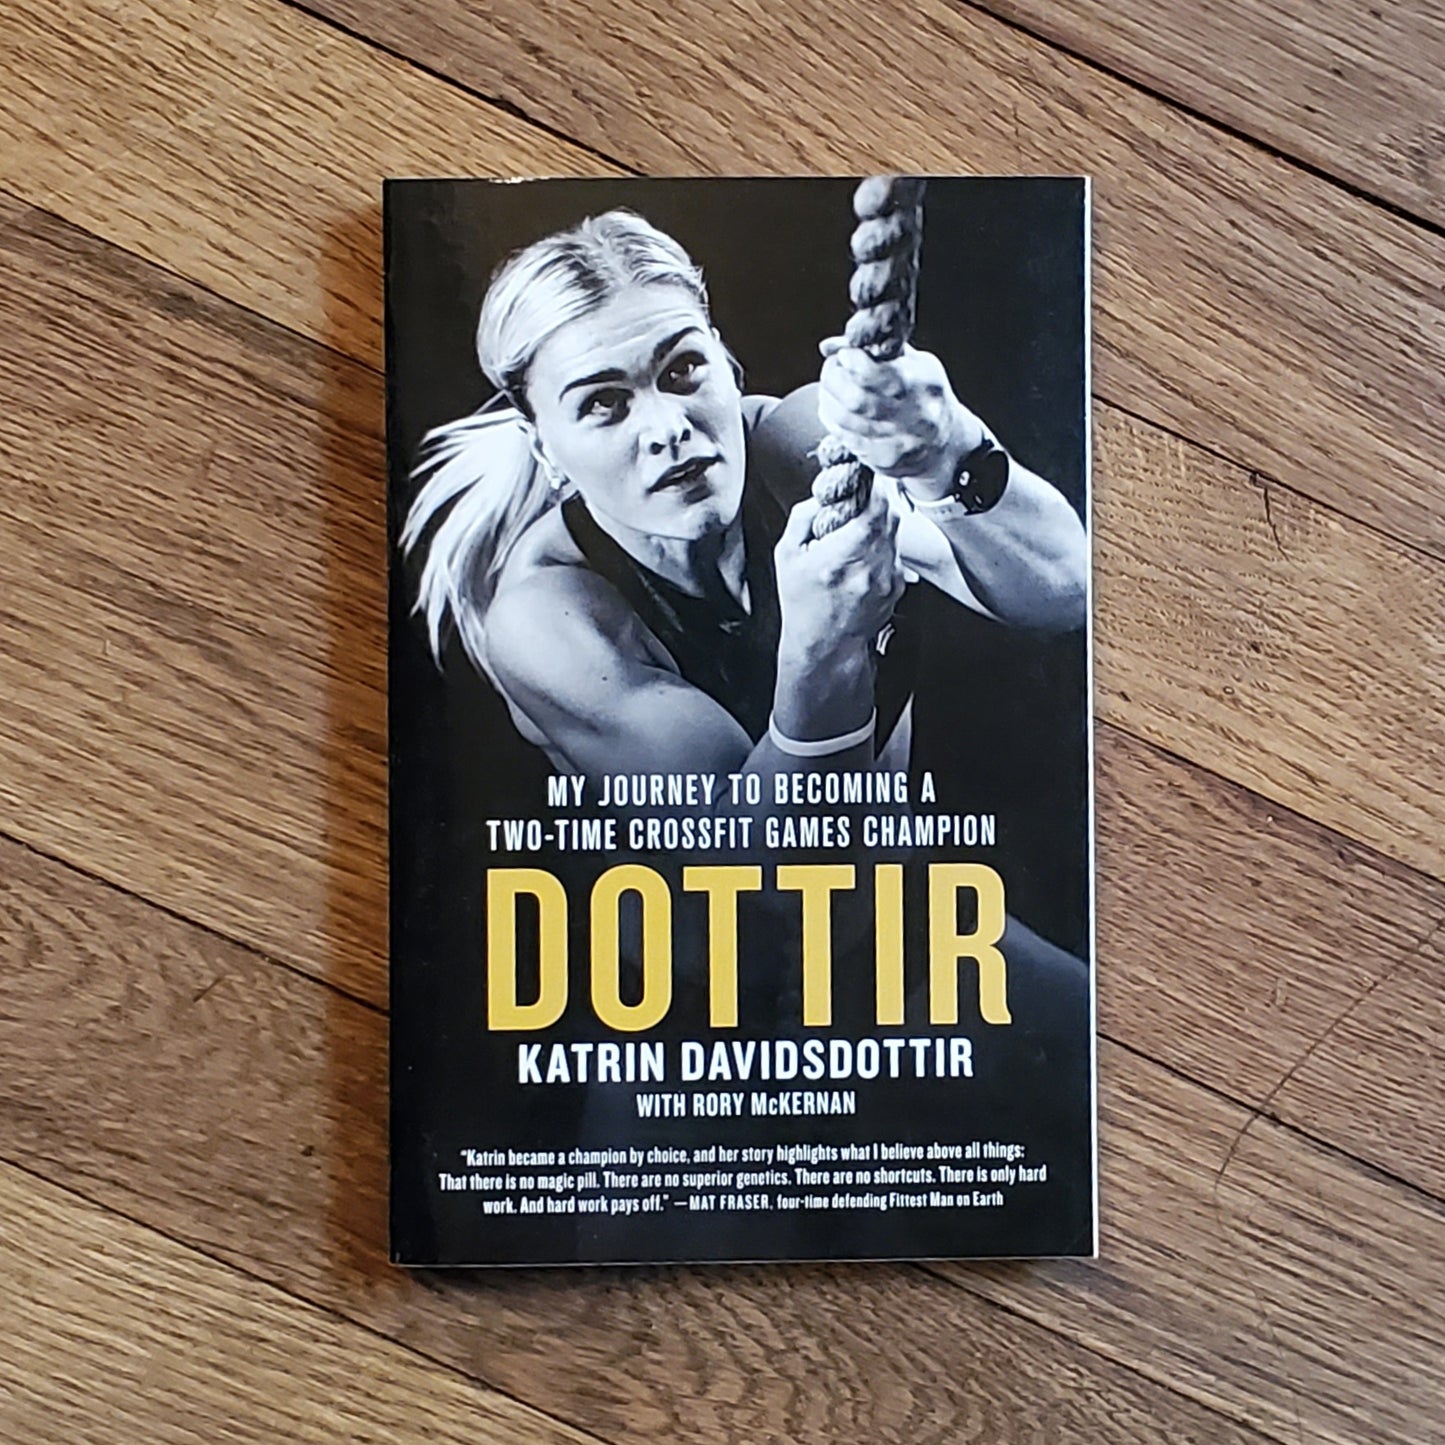 Dottir: My Journey to Becoming a Two-Time CrossFit Games Champion